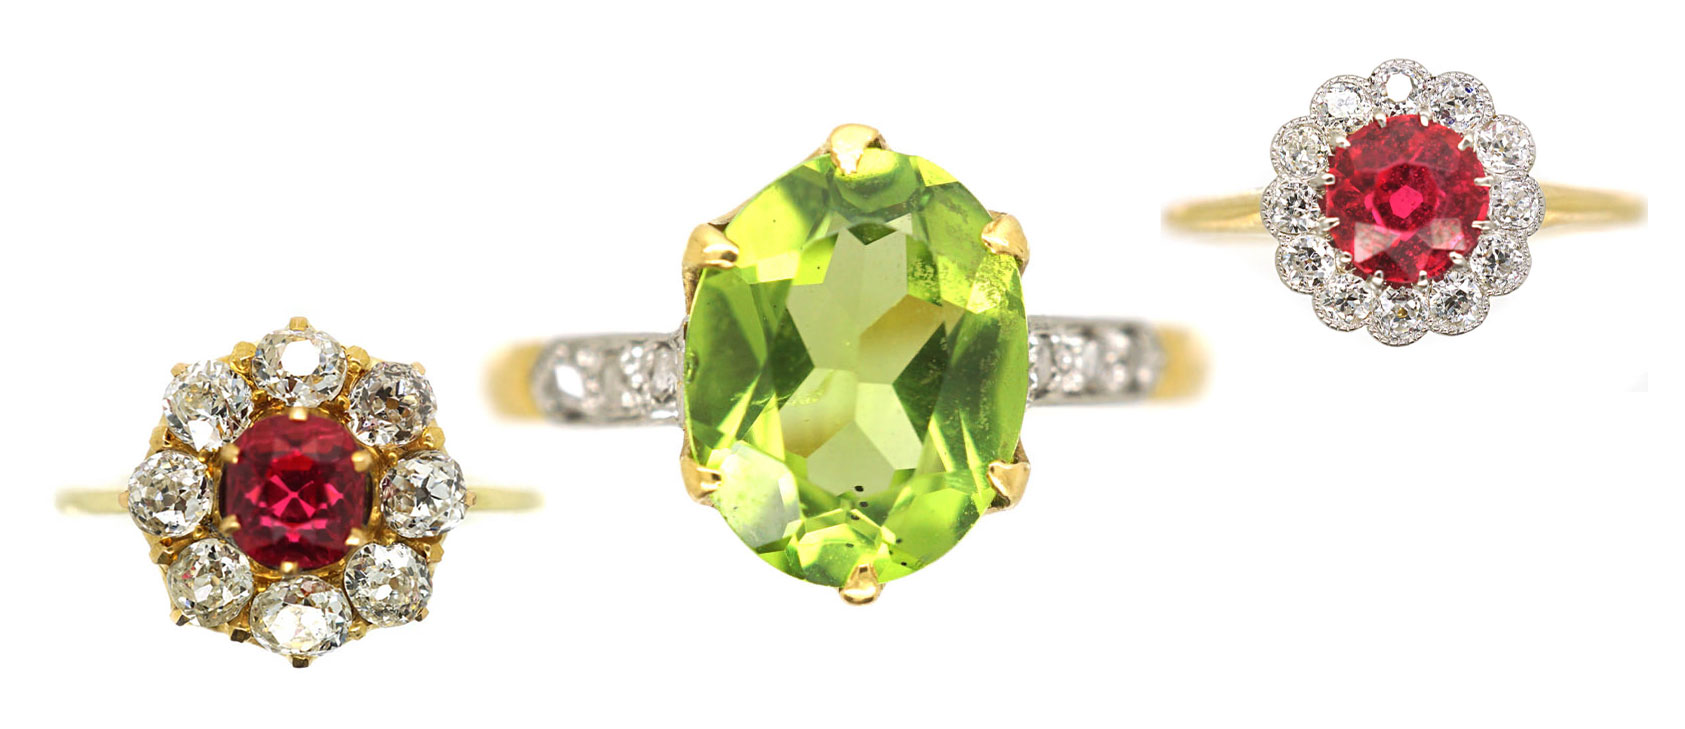 Antique peridot and spinel rings